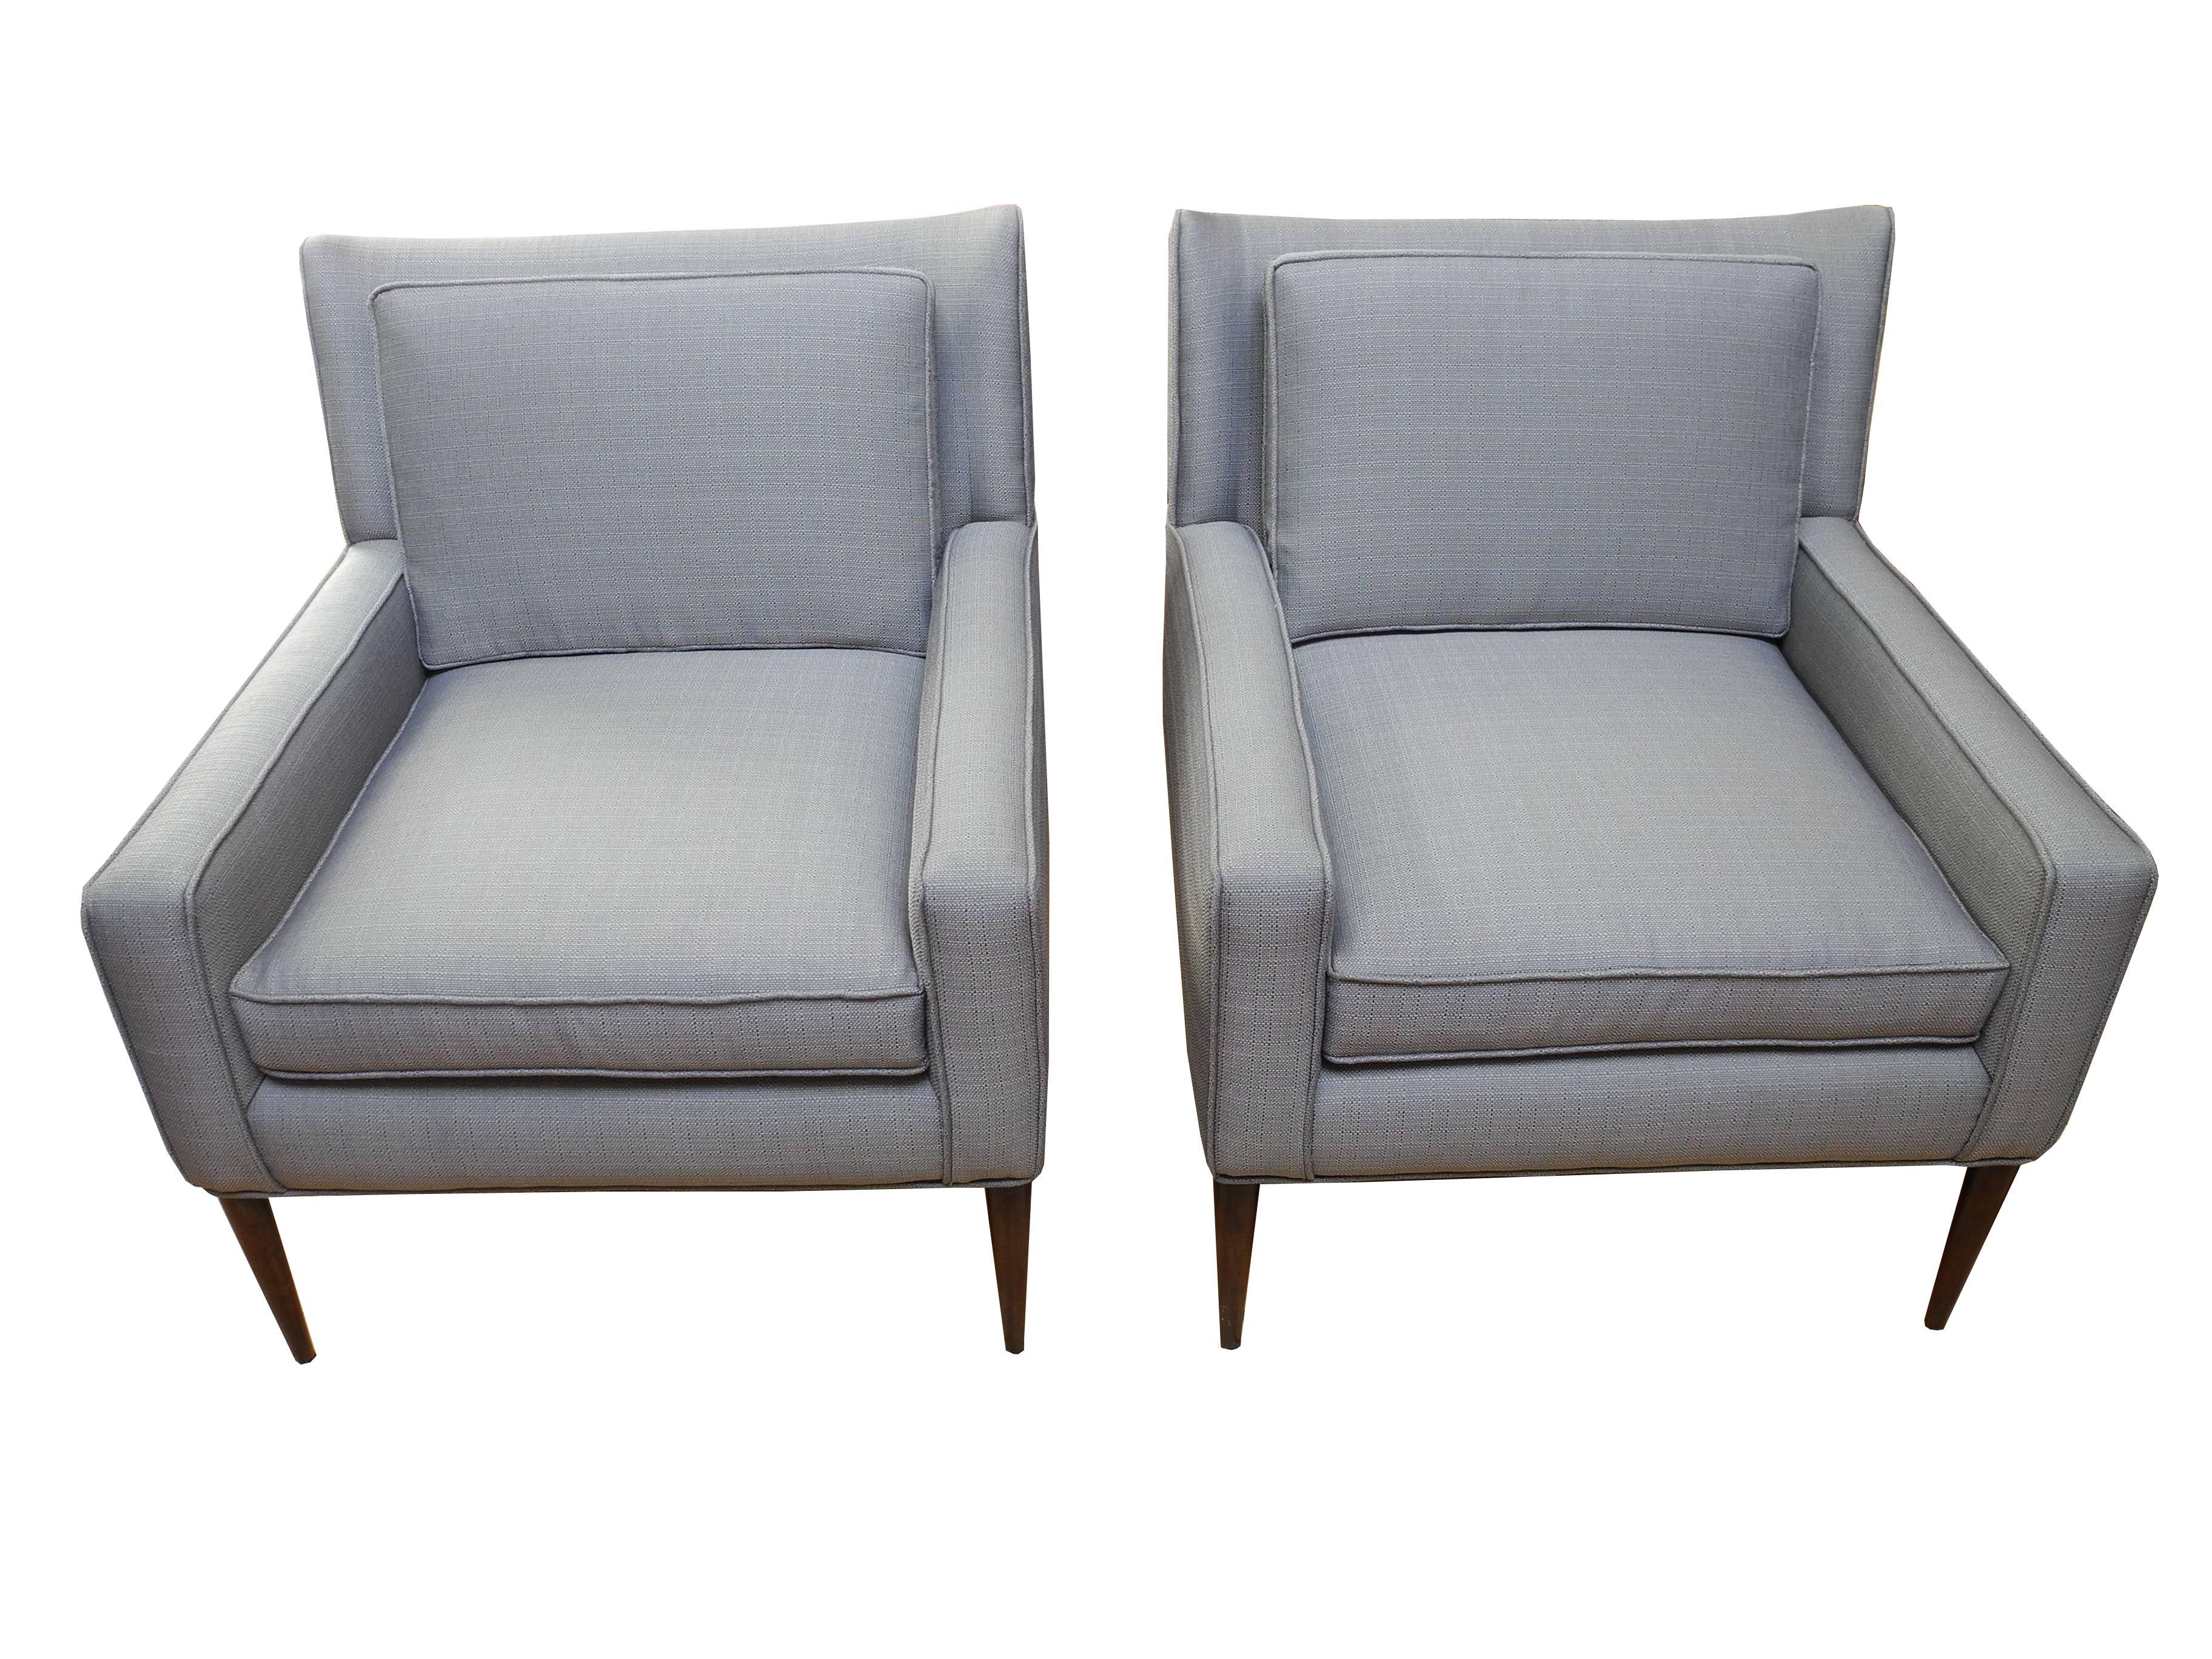 American Pair of Modern Upholstered Lounge Chairs Designed by Paul McCobb for Directional For Sale